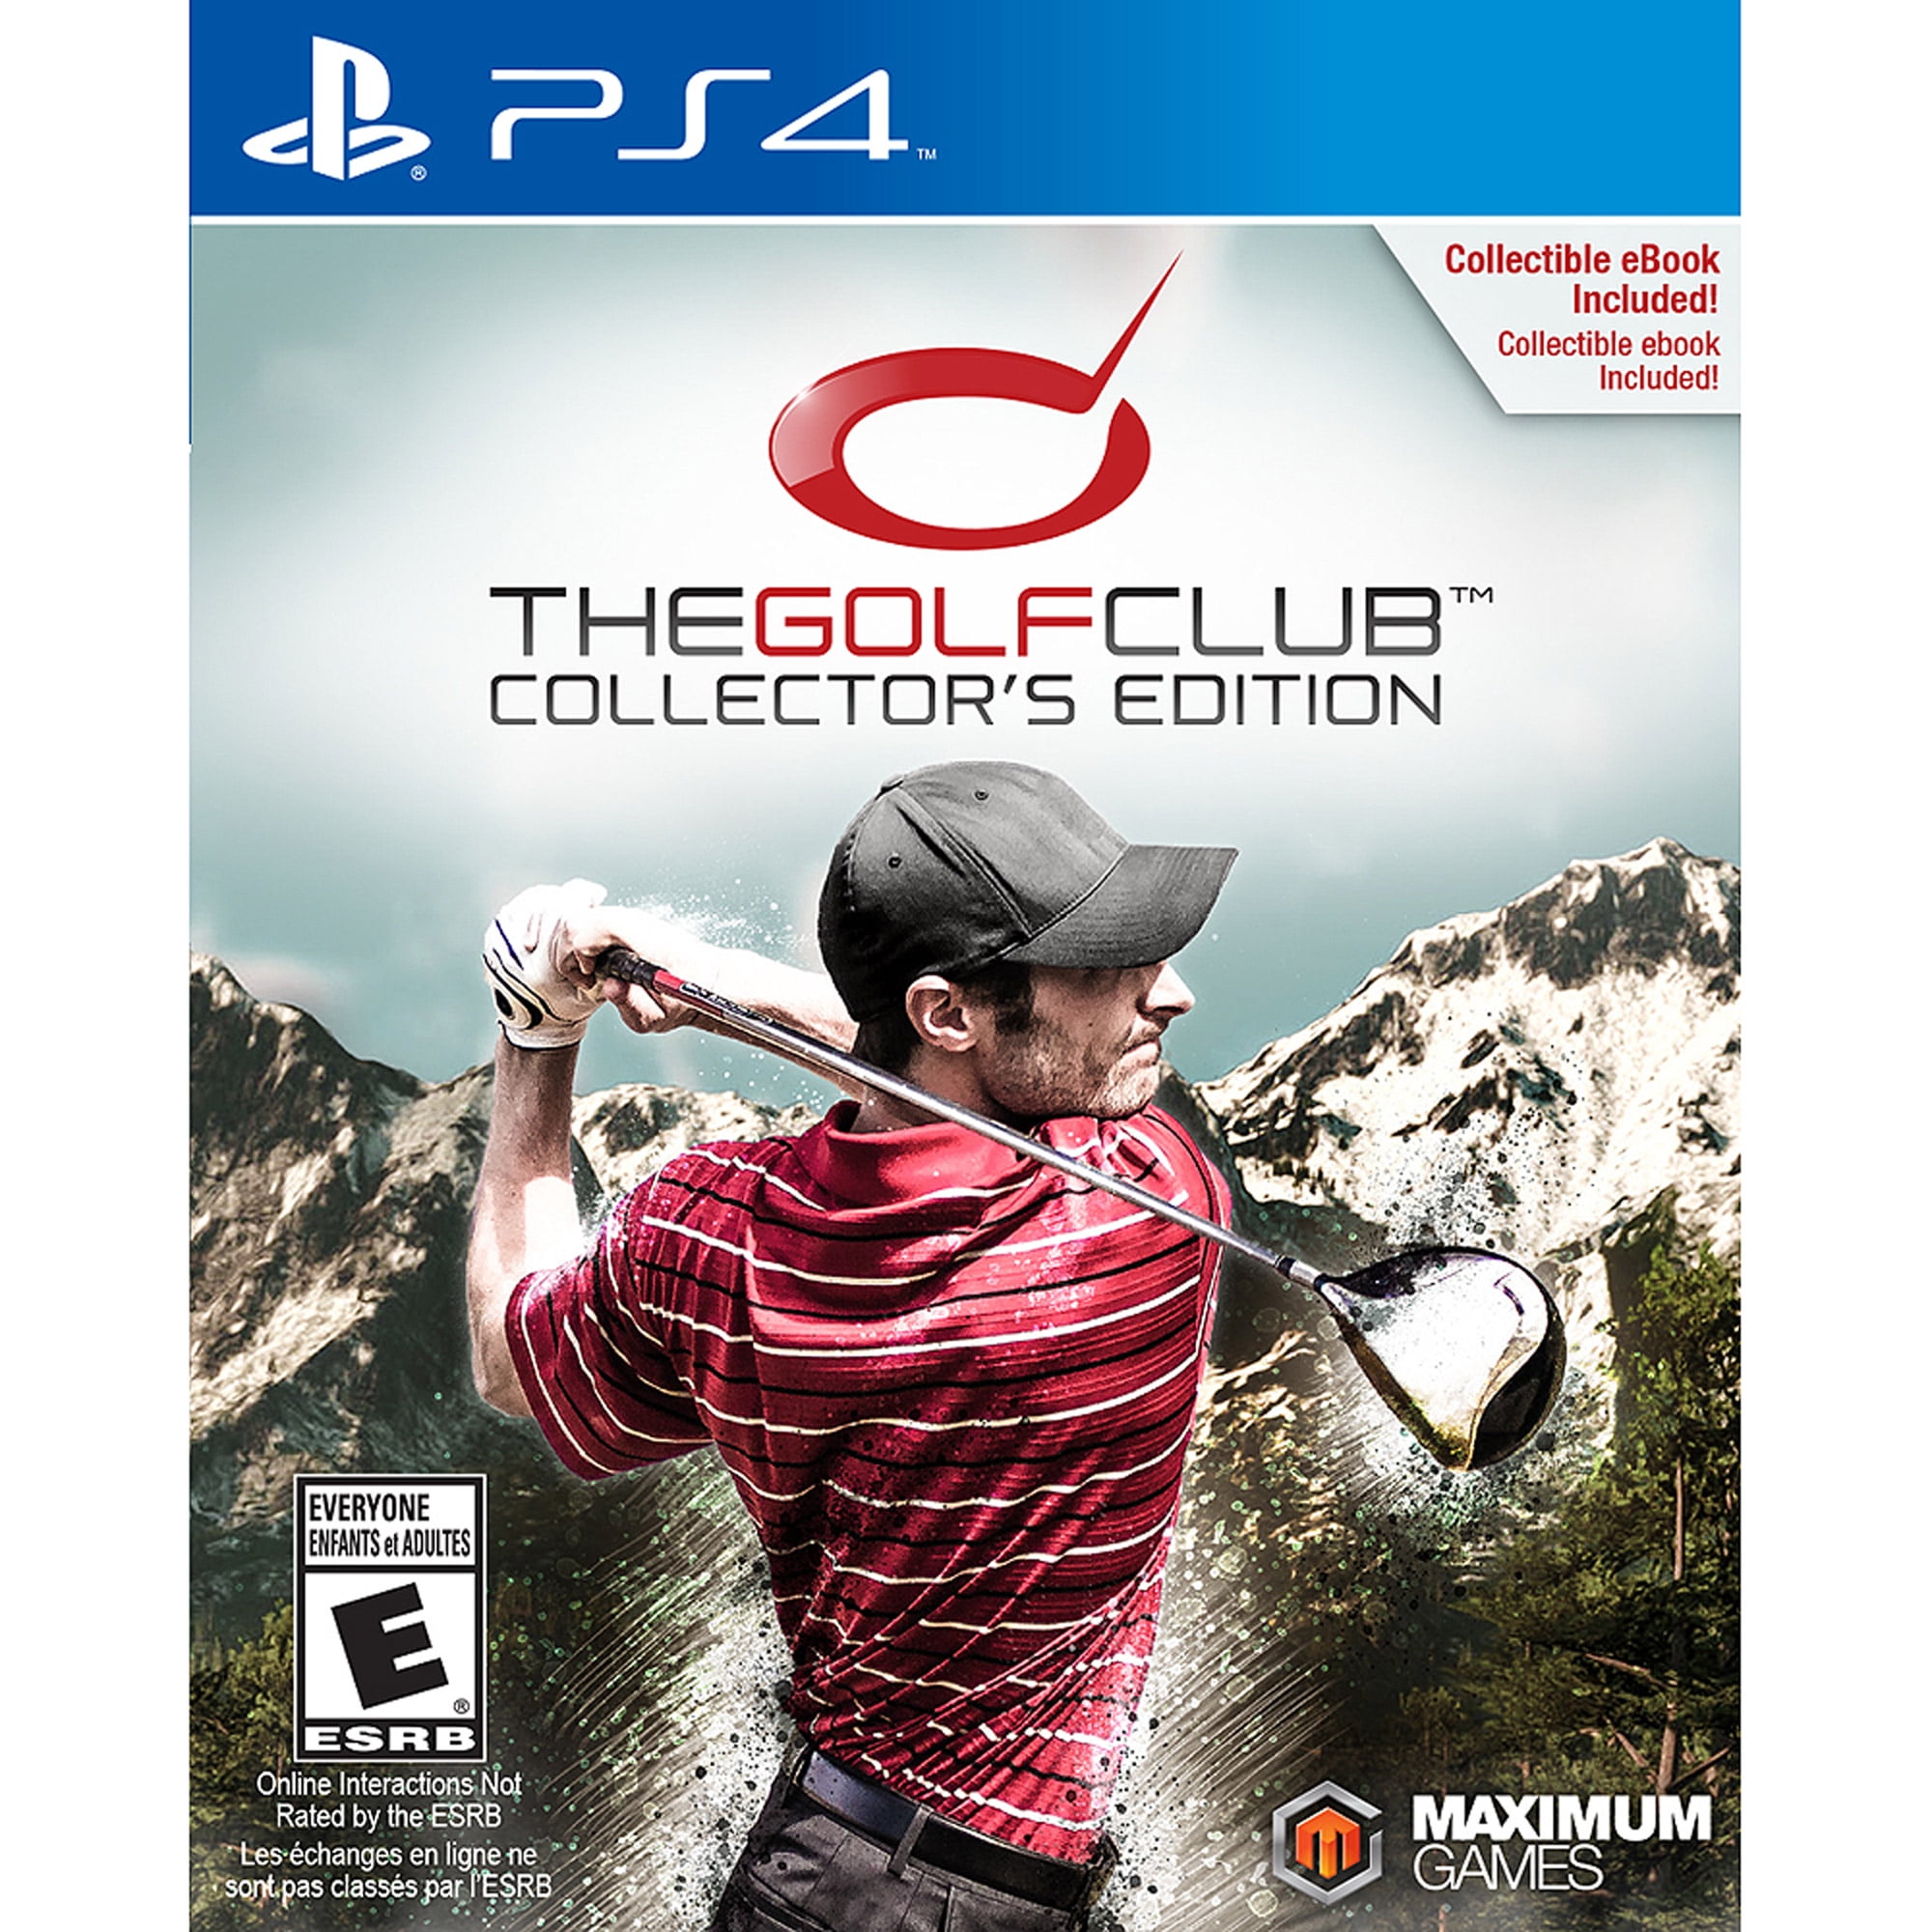 Golf Club Collectors Edition Ps4 Walmart pertaining to golfing games ps4 for Cozy